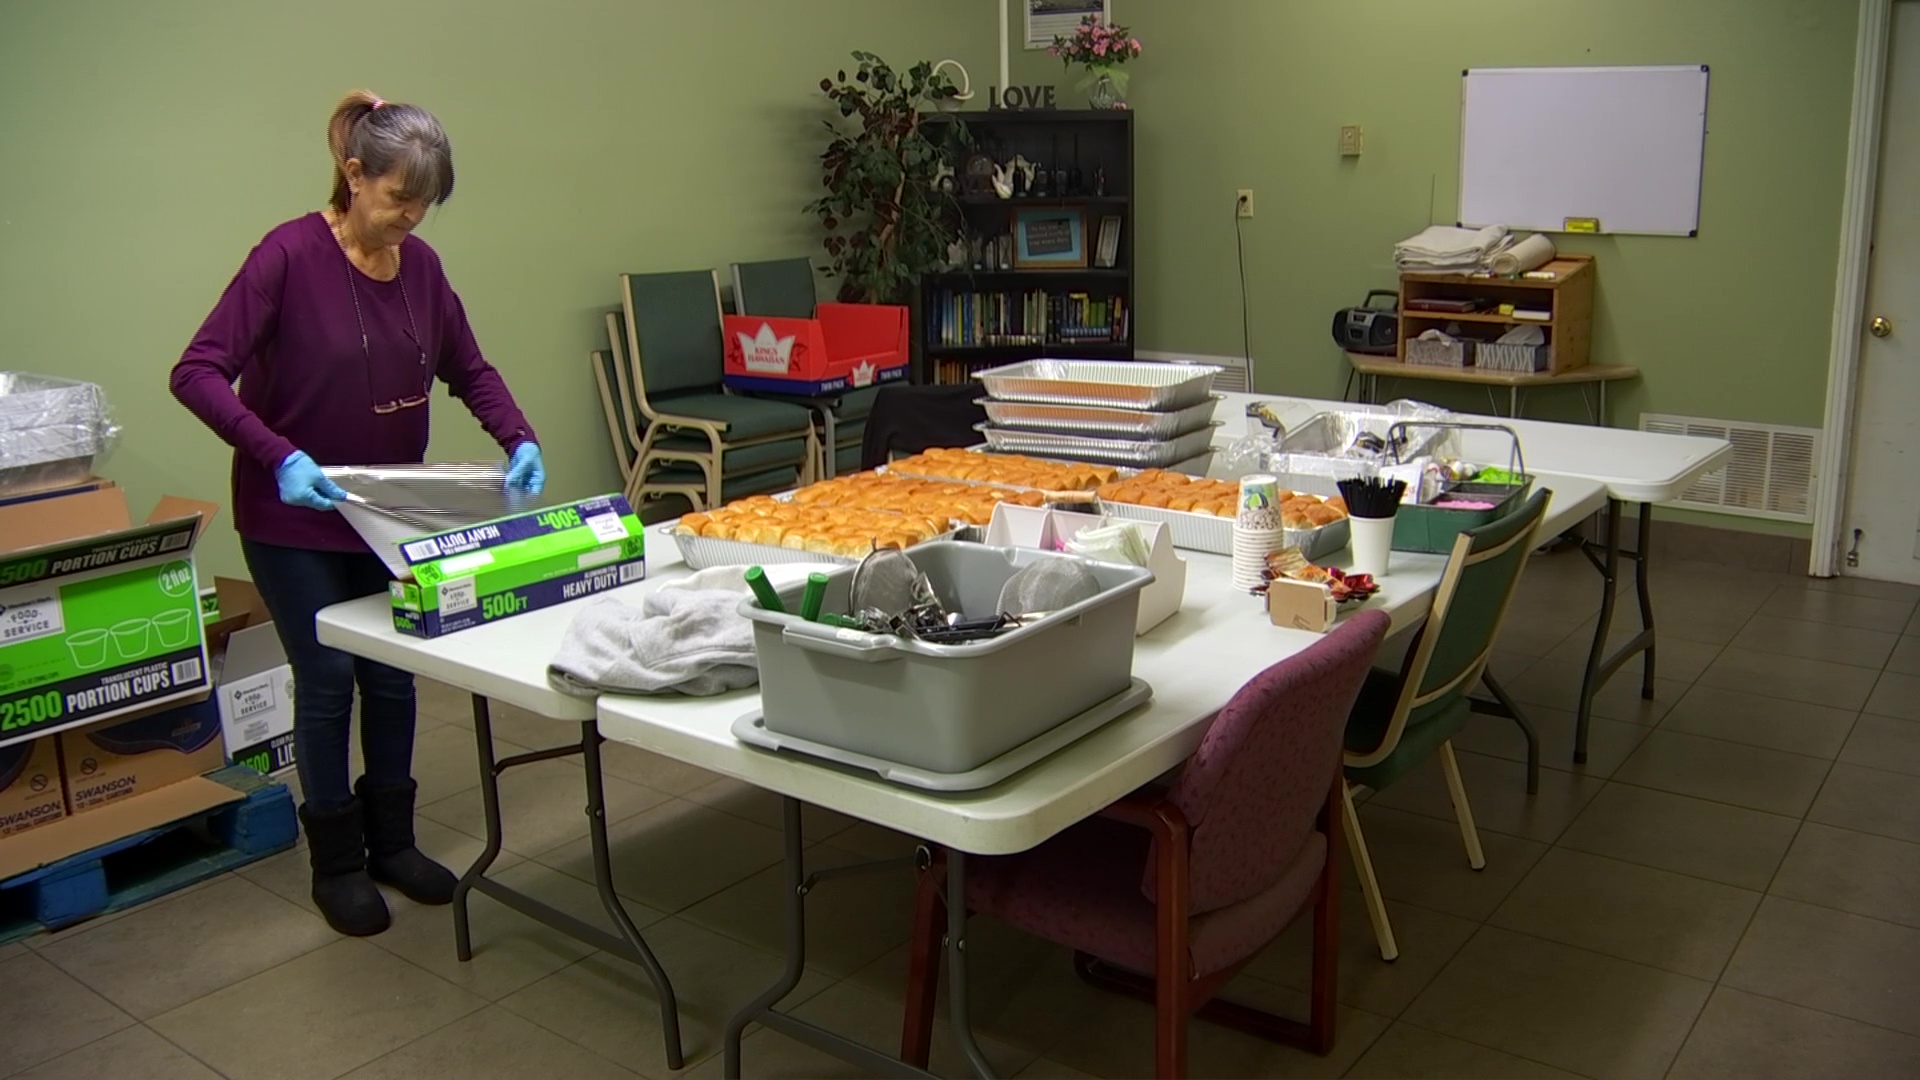 Haltom City Church Continues to Feed Those In Need Despite Own
Challenges